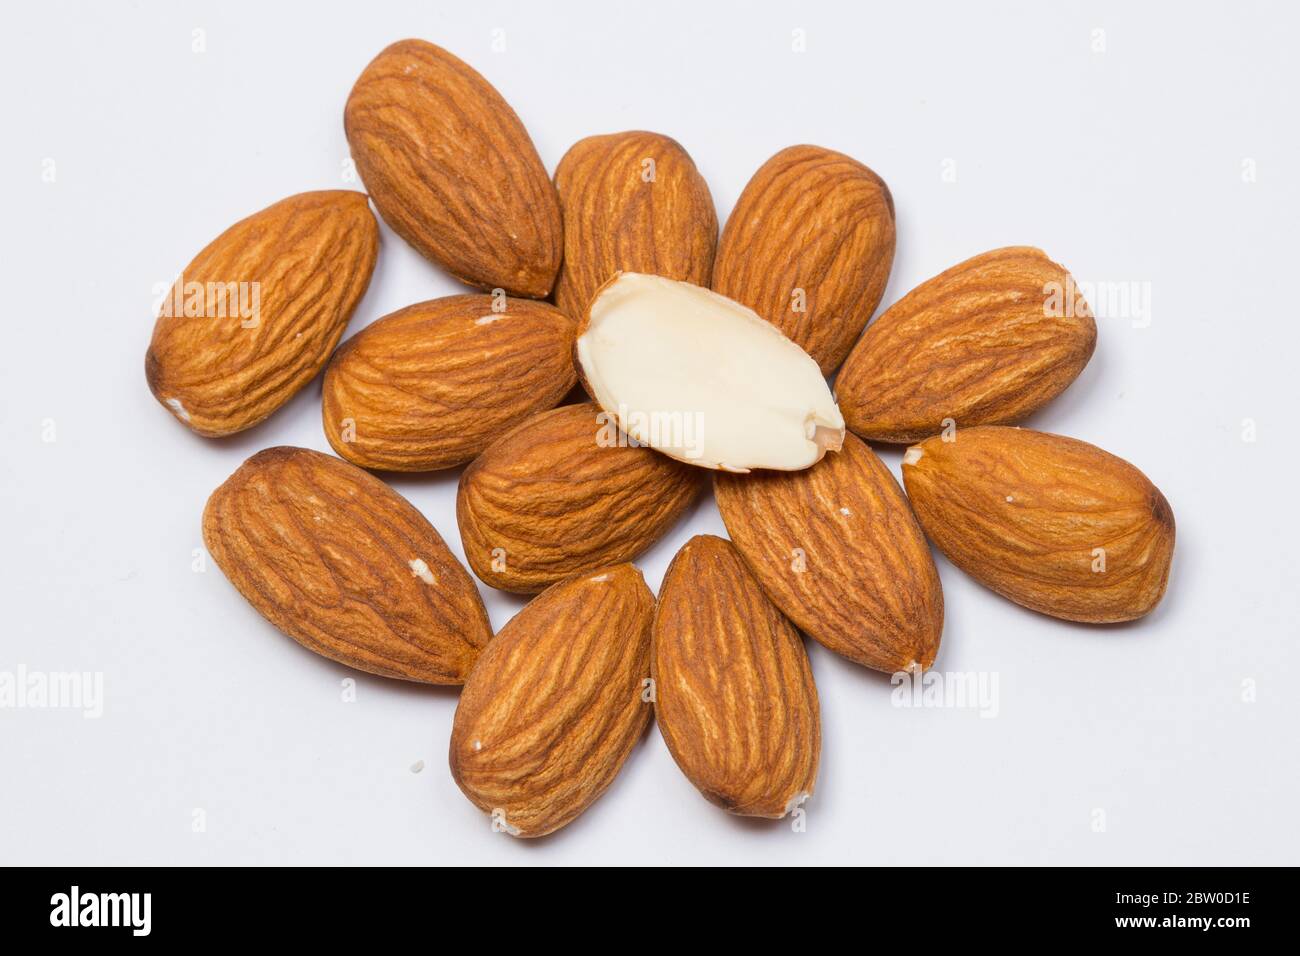 Close-up view of almonds on white background. Stock Photo